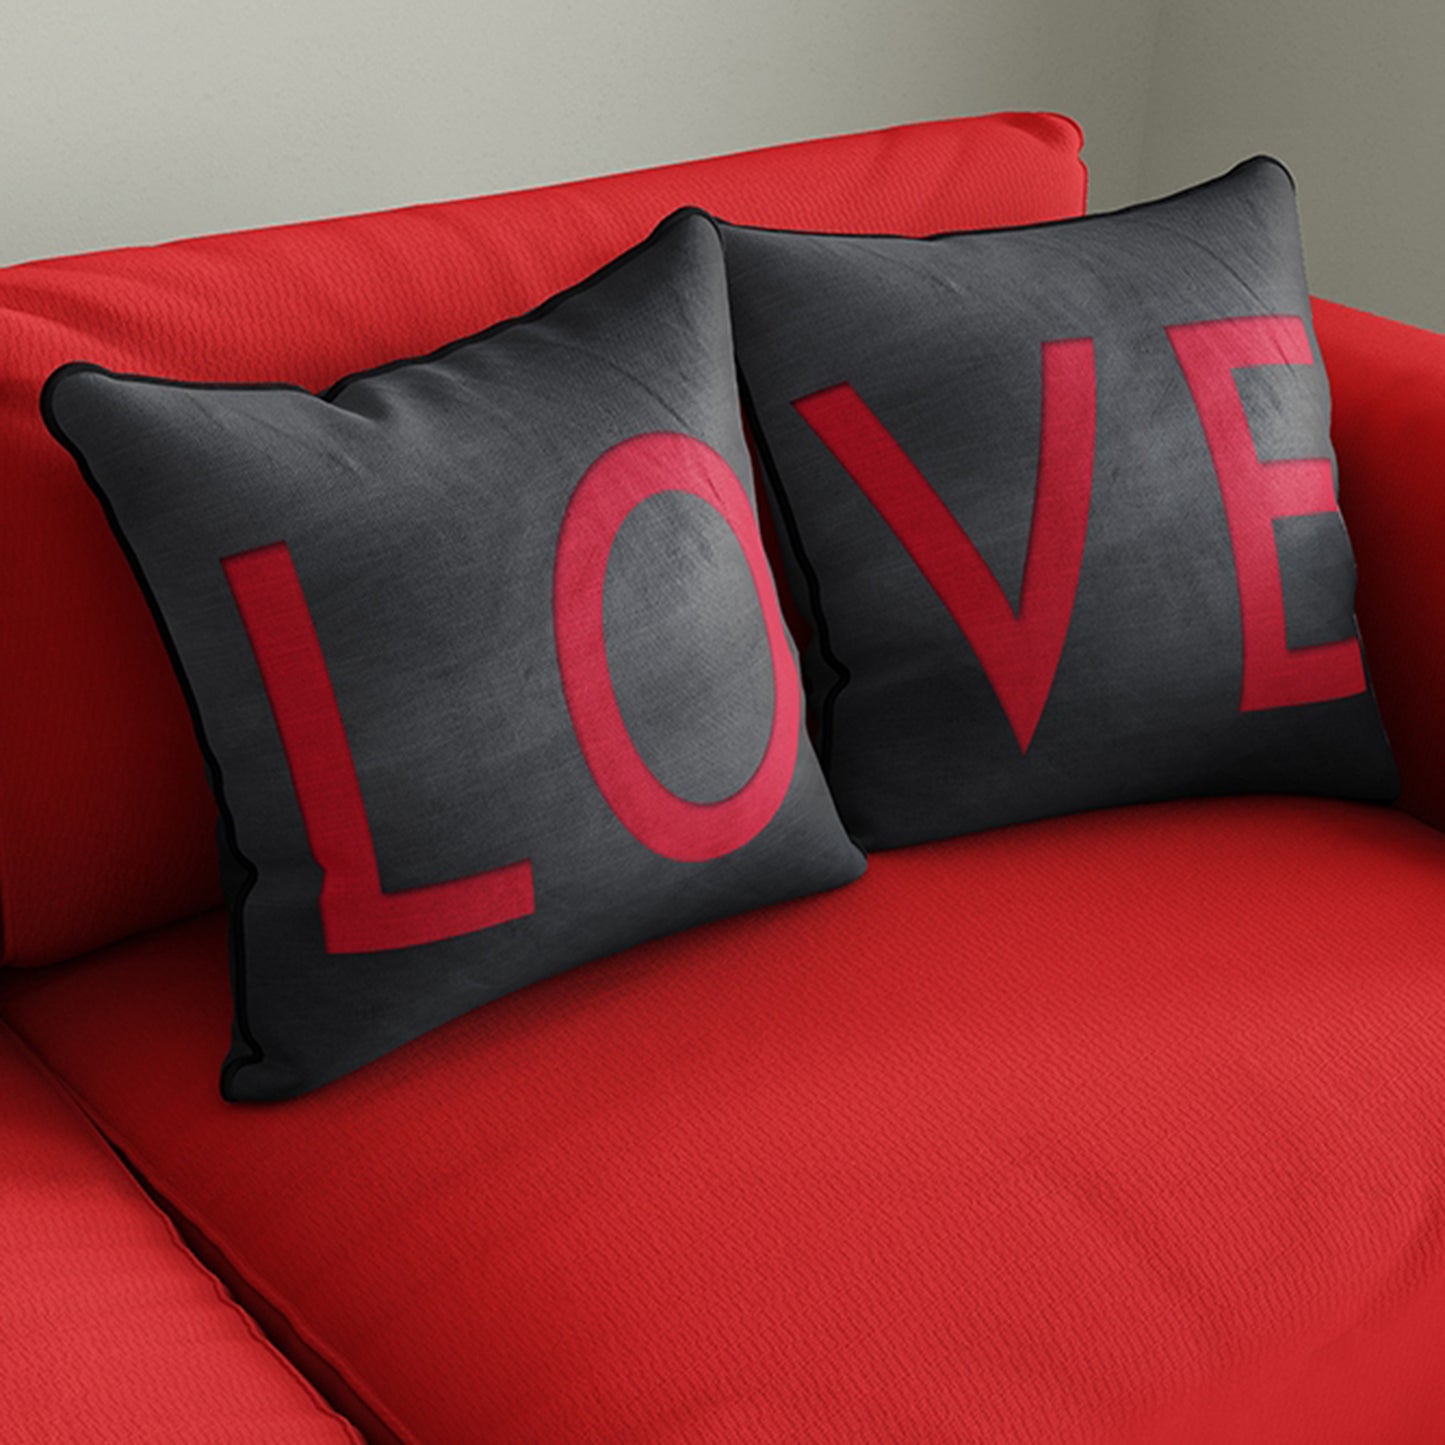 Valentine's Day Love Square 18"x18" Throw Pillow Cover Set of 2